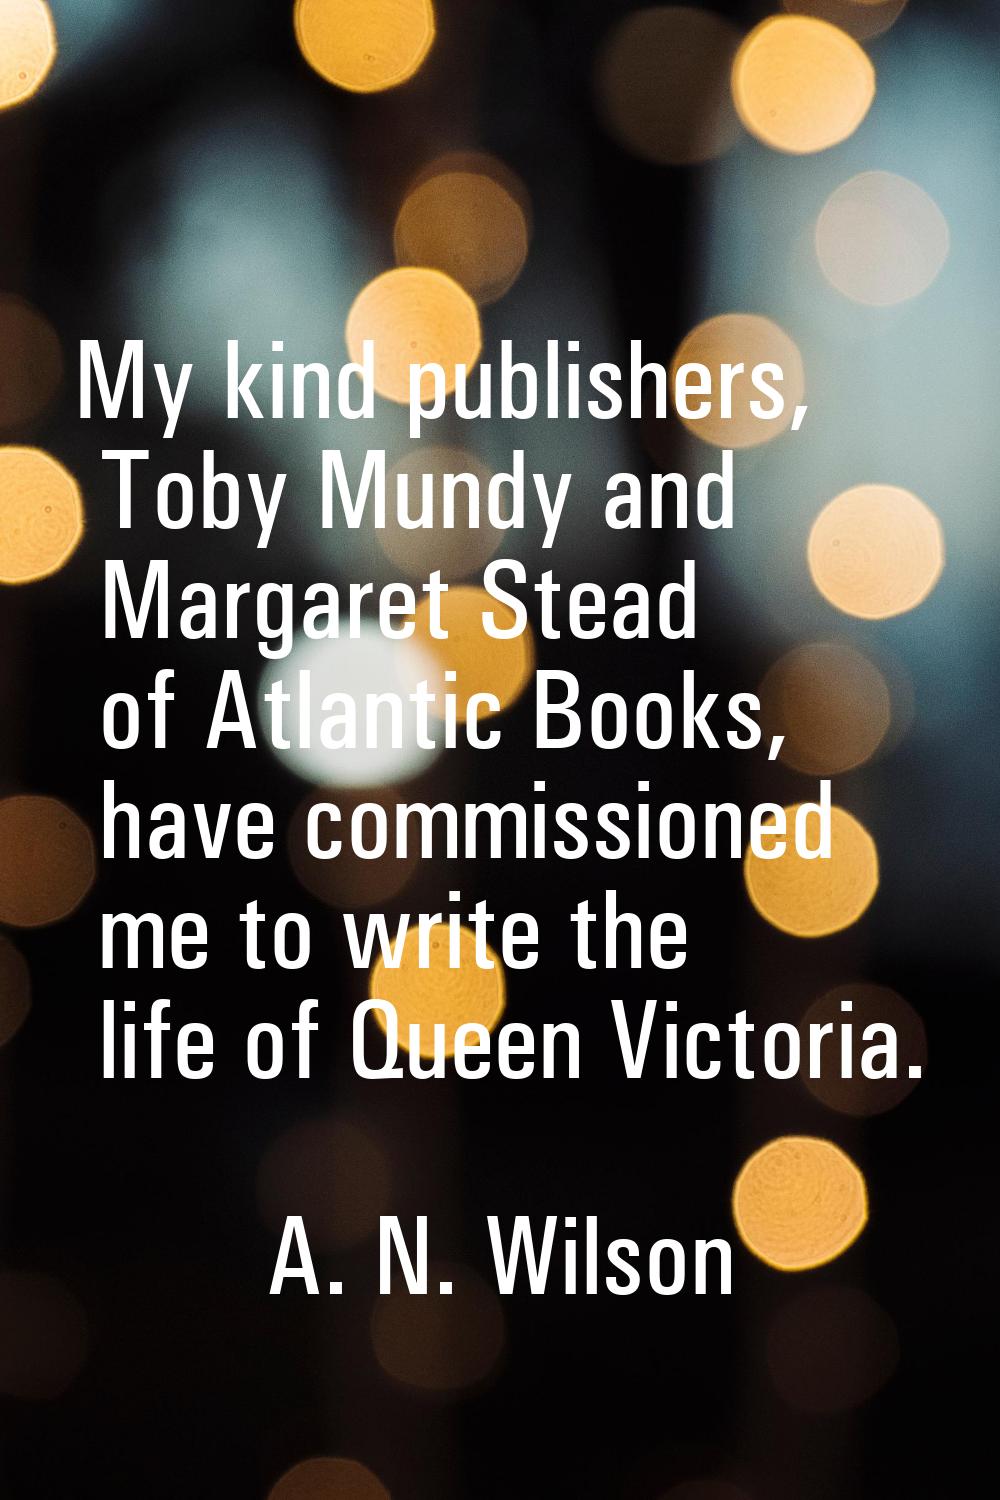 My kind publishers, Toby Mundy and Margaret Stead of Atlantic Books, have commissioned me to write 